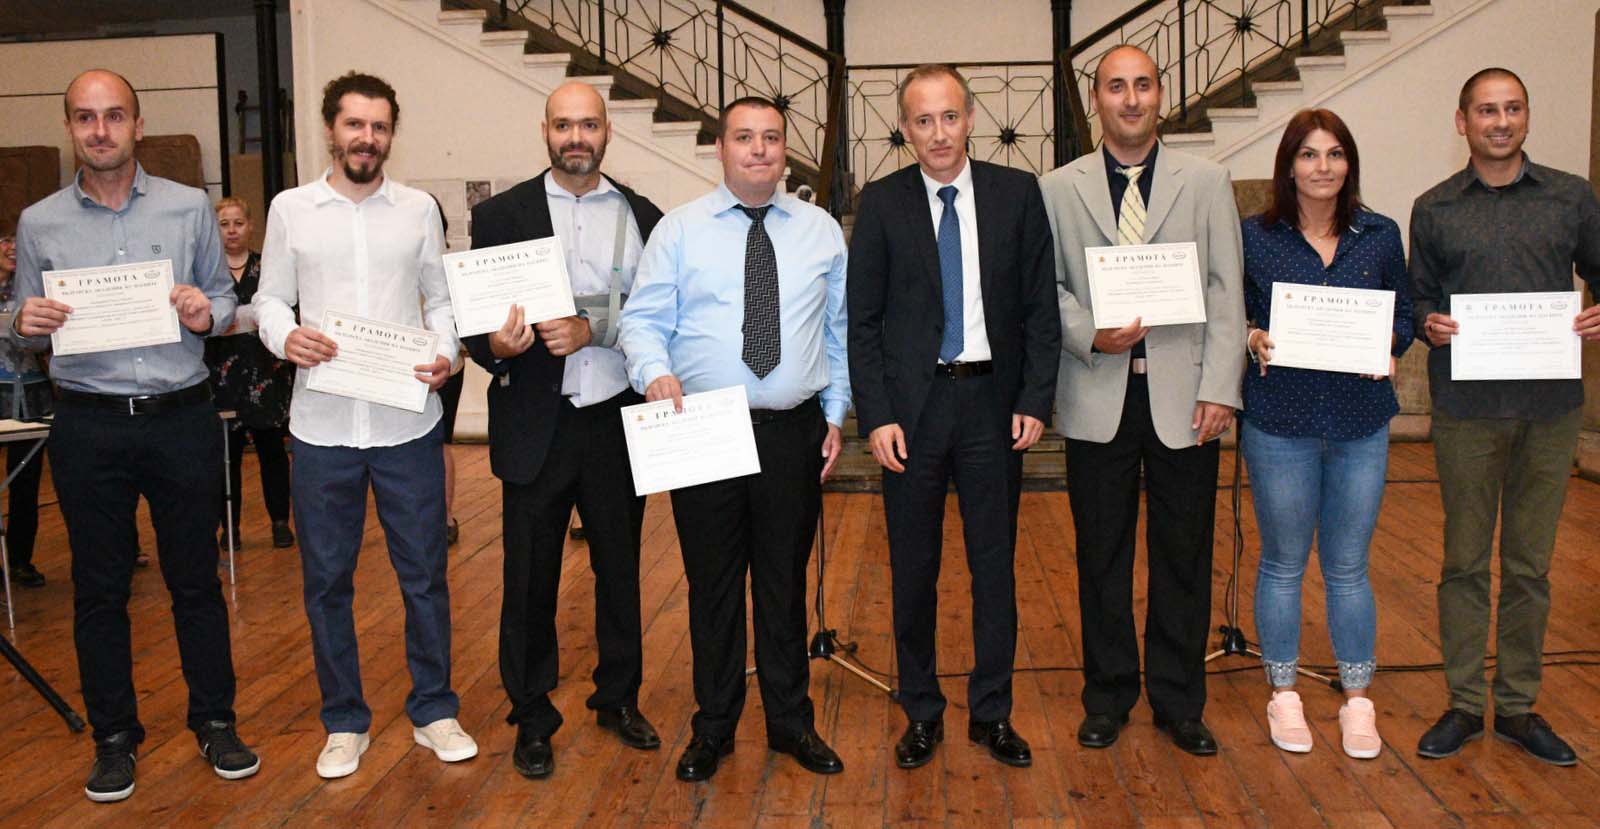 Awards 'Young scientists' 2019